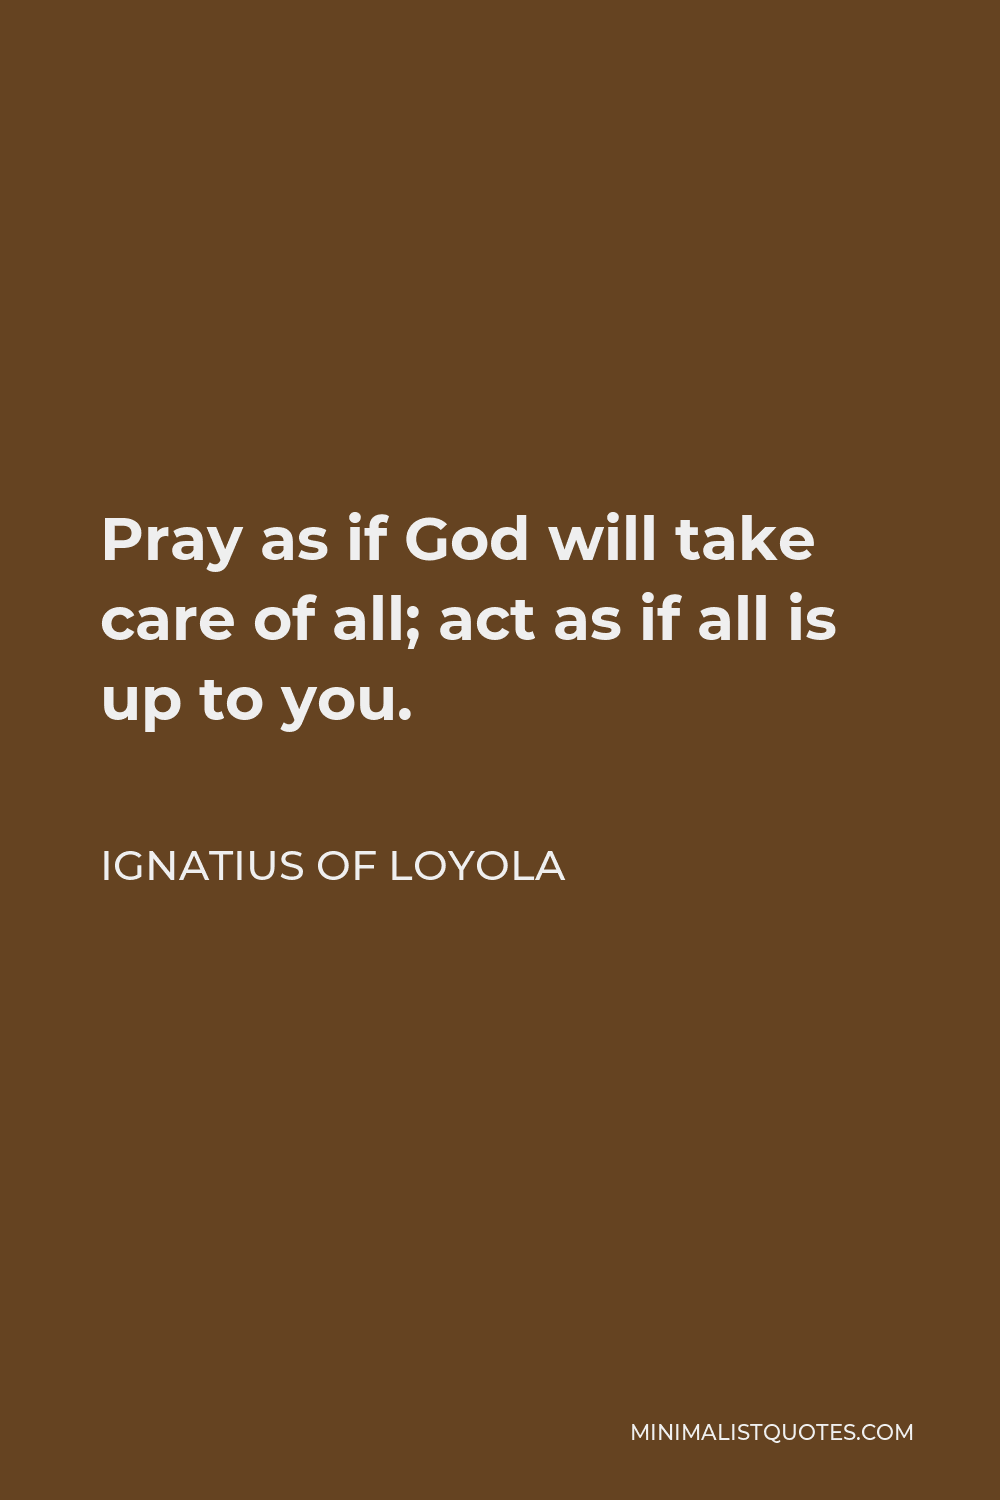 Ignatius of Loyola Quote - Pray as if God will take care of all; act as if all is up to you.